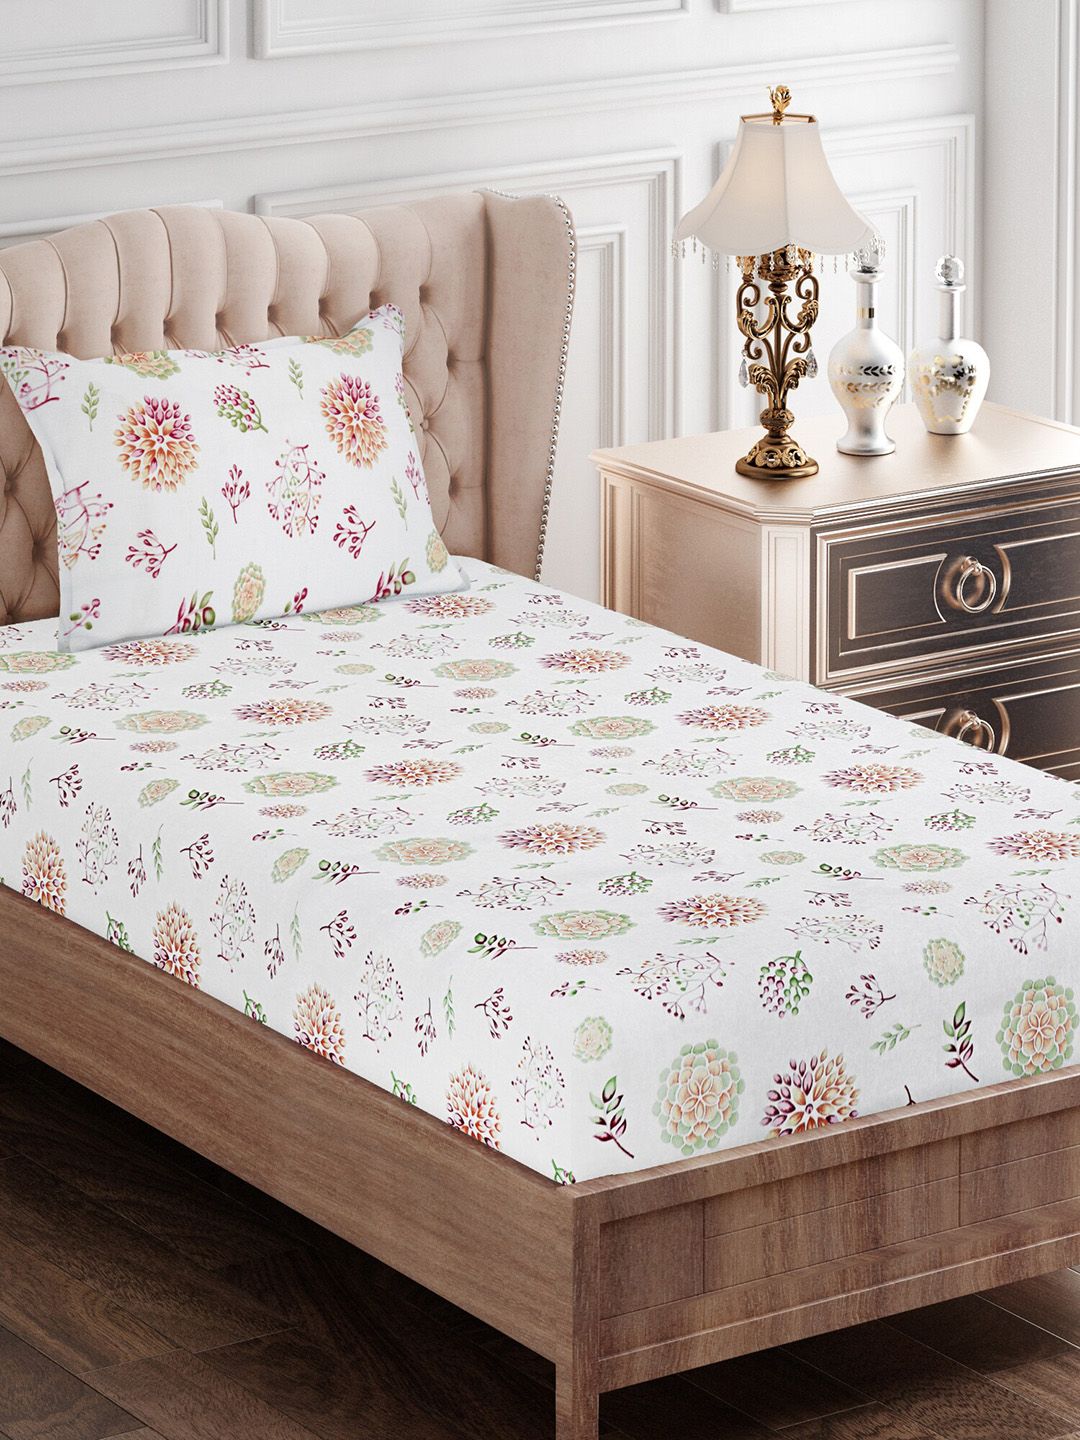 SEJ by Nisha Gupta Floral 144 TC Single Bedsheet with 1 Pillow Cover Price in India